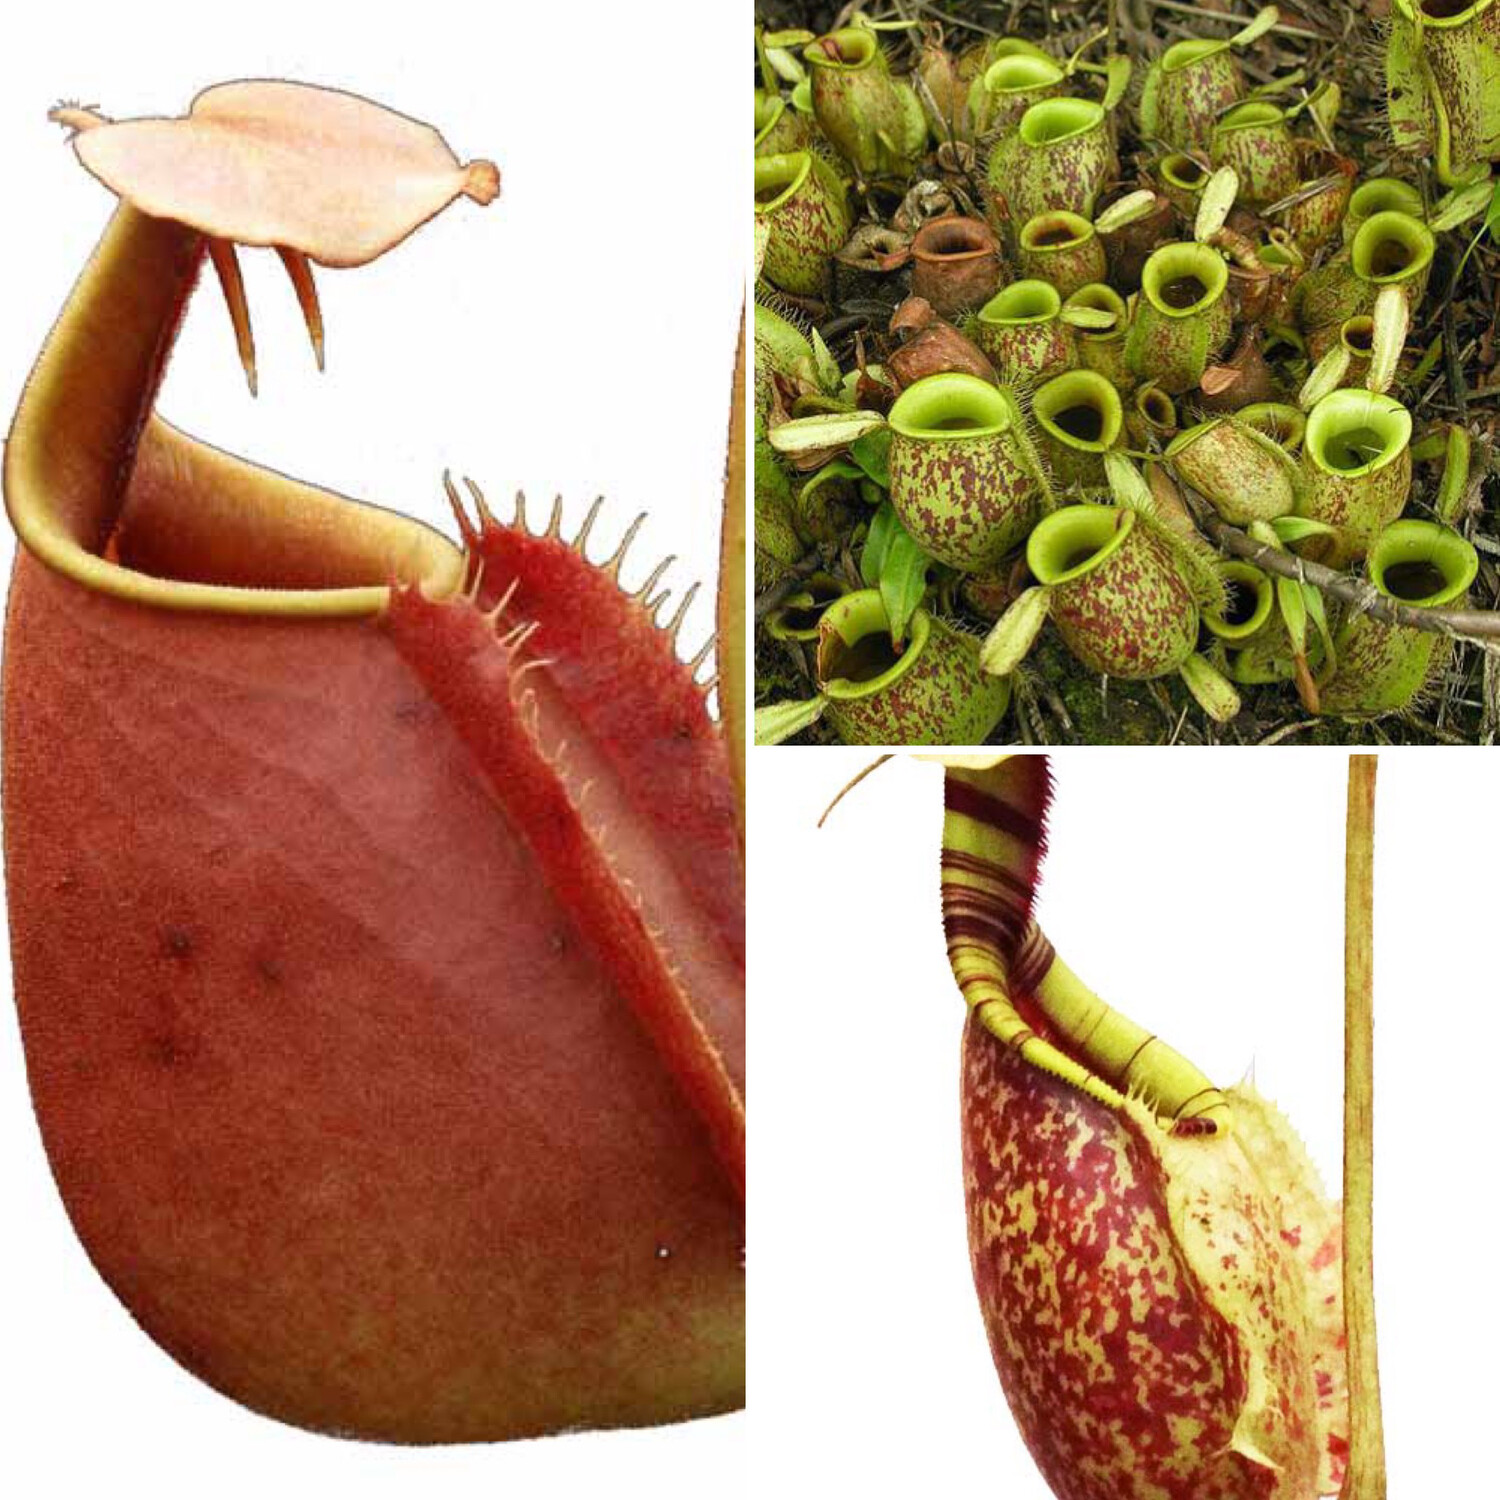 Lowland Nepenthes Starter pack #3 “The classics”